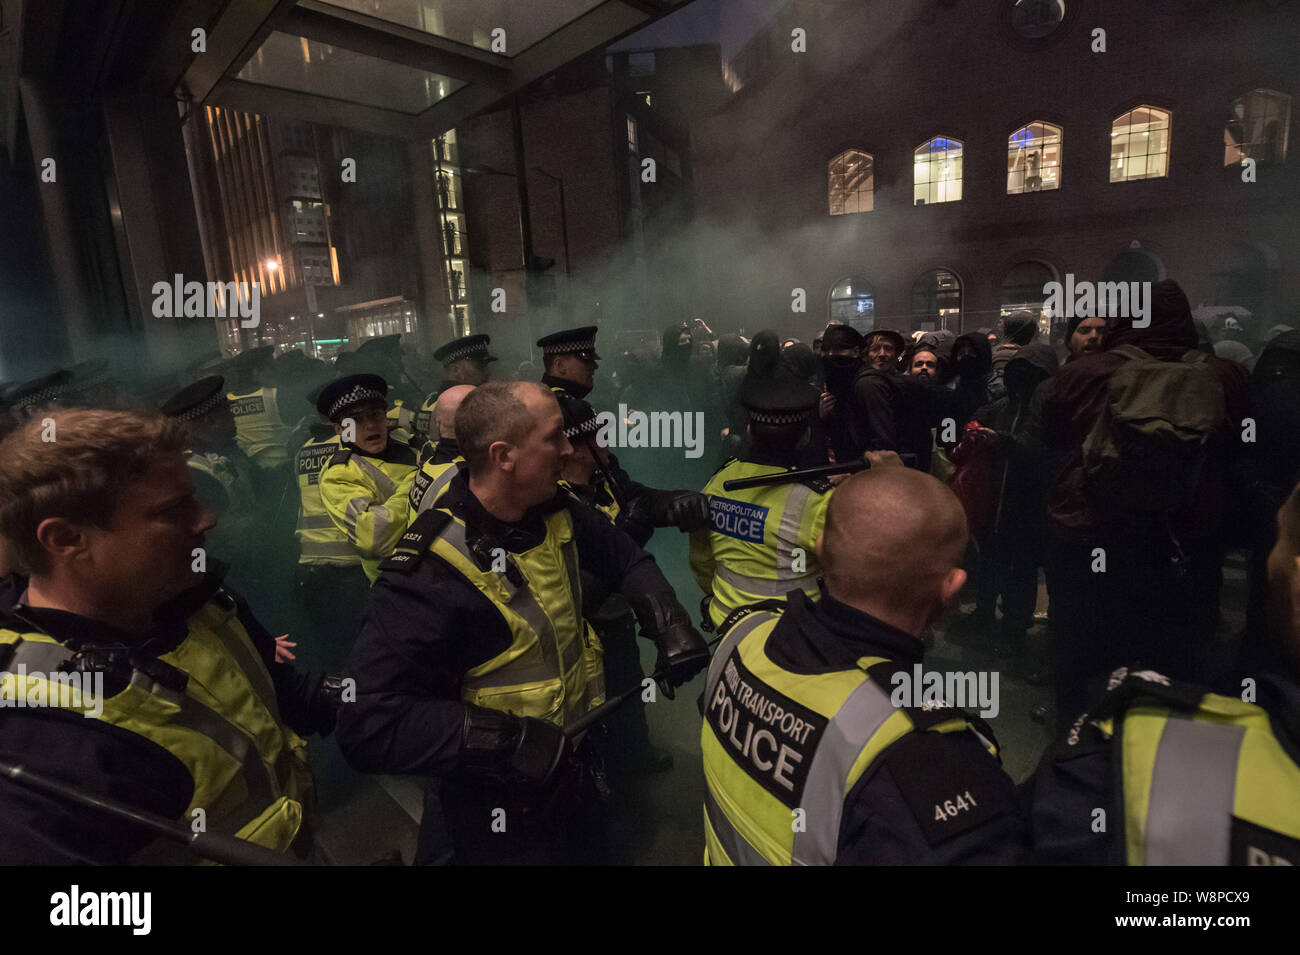 London, UK. 24th October, 2015. Up to 150 protesters took part in a demonstration at St Pancras railway station in response to the plight of immigrant Stock Photo